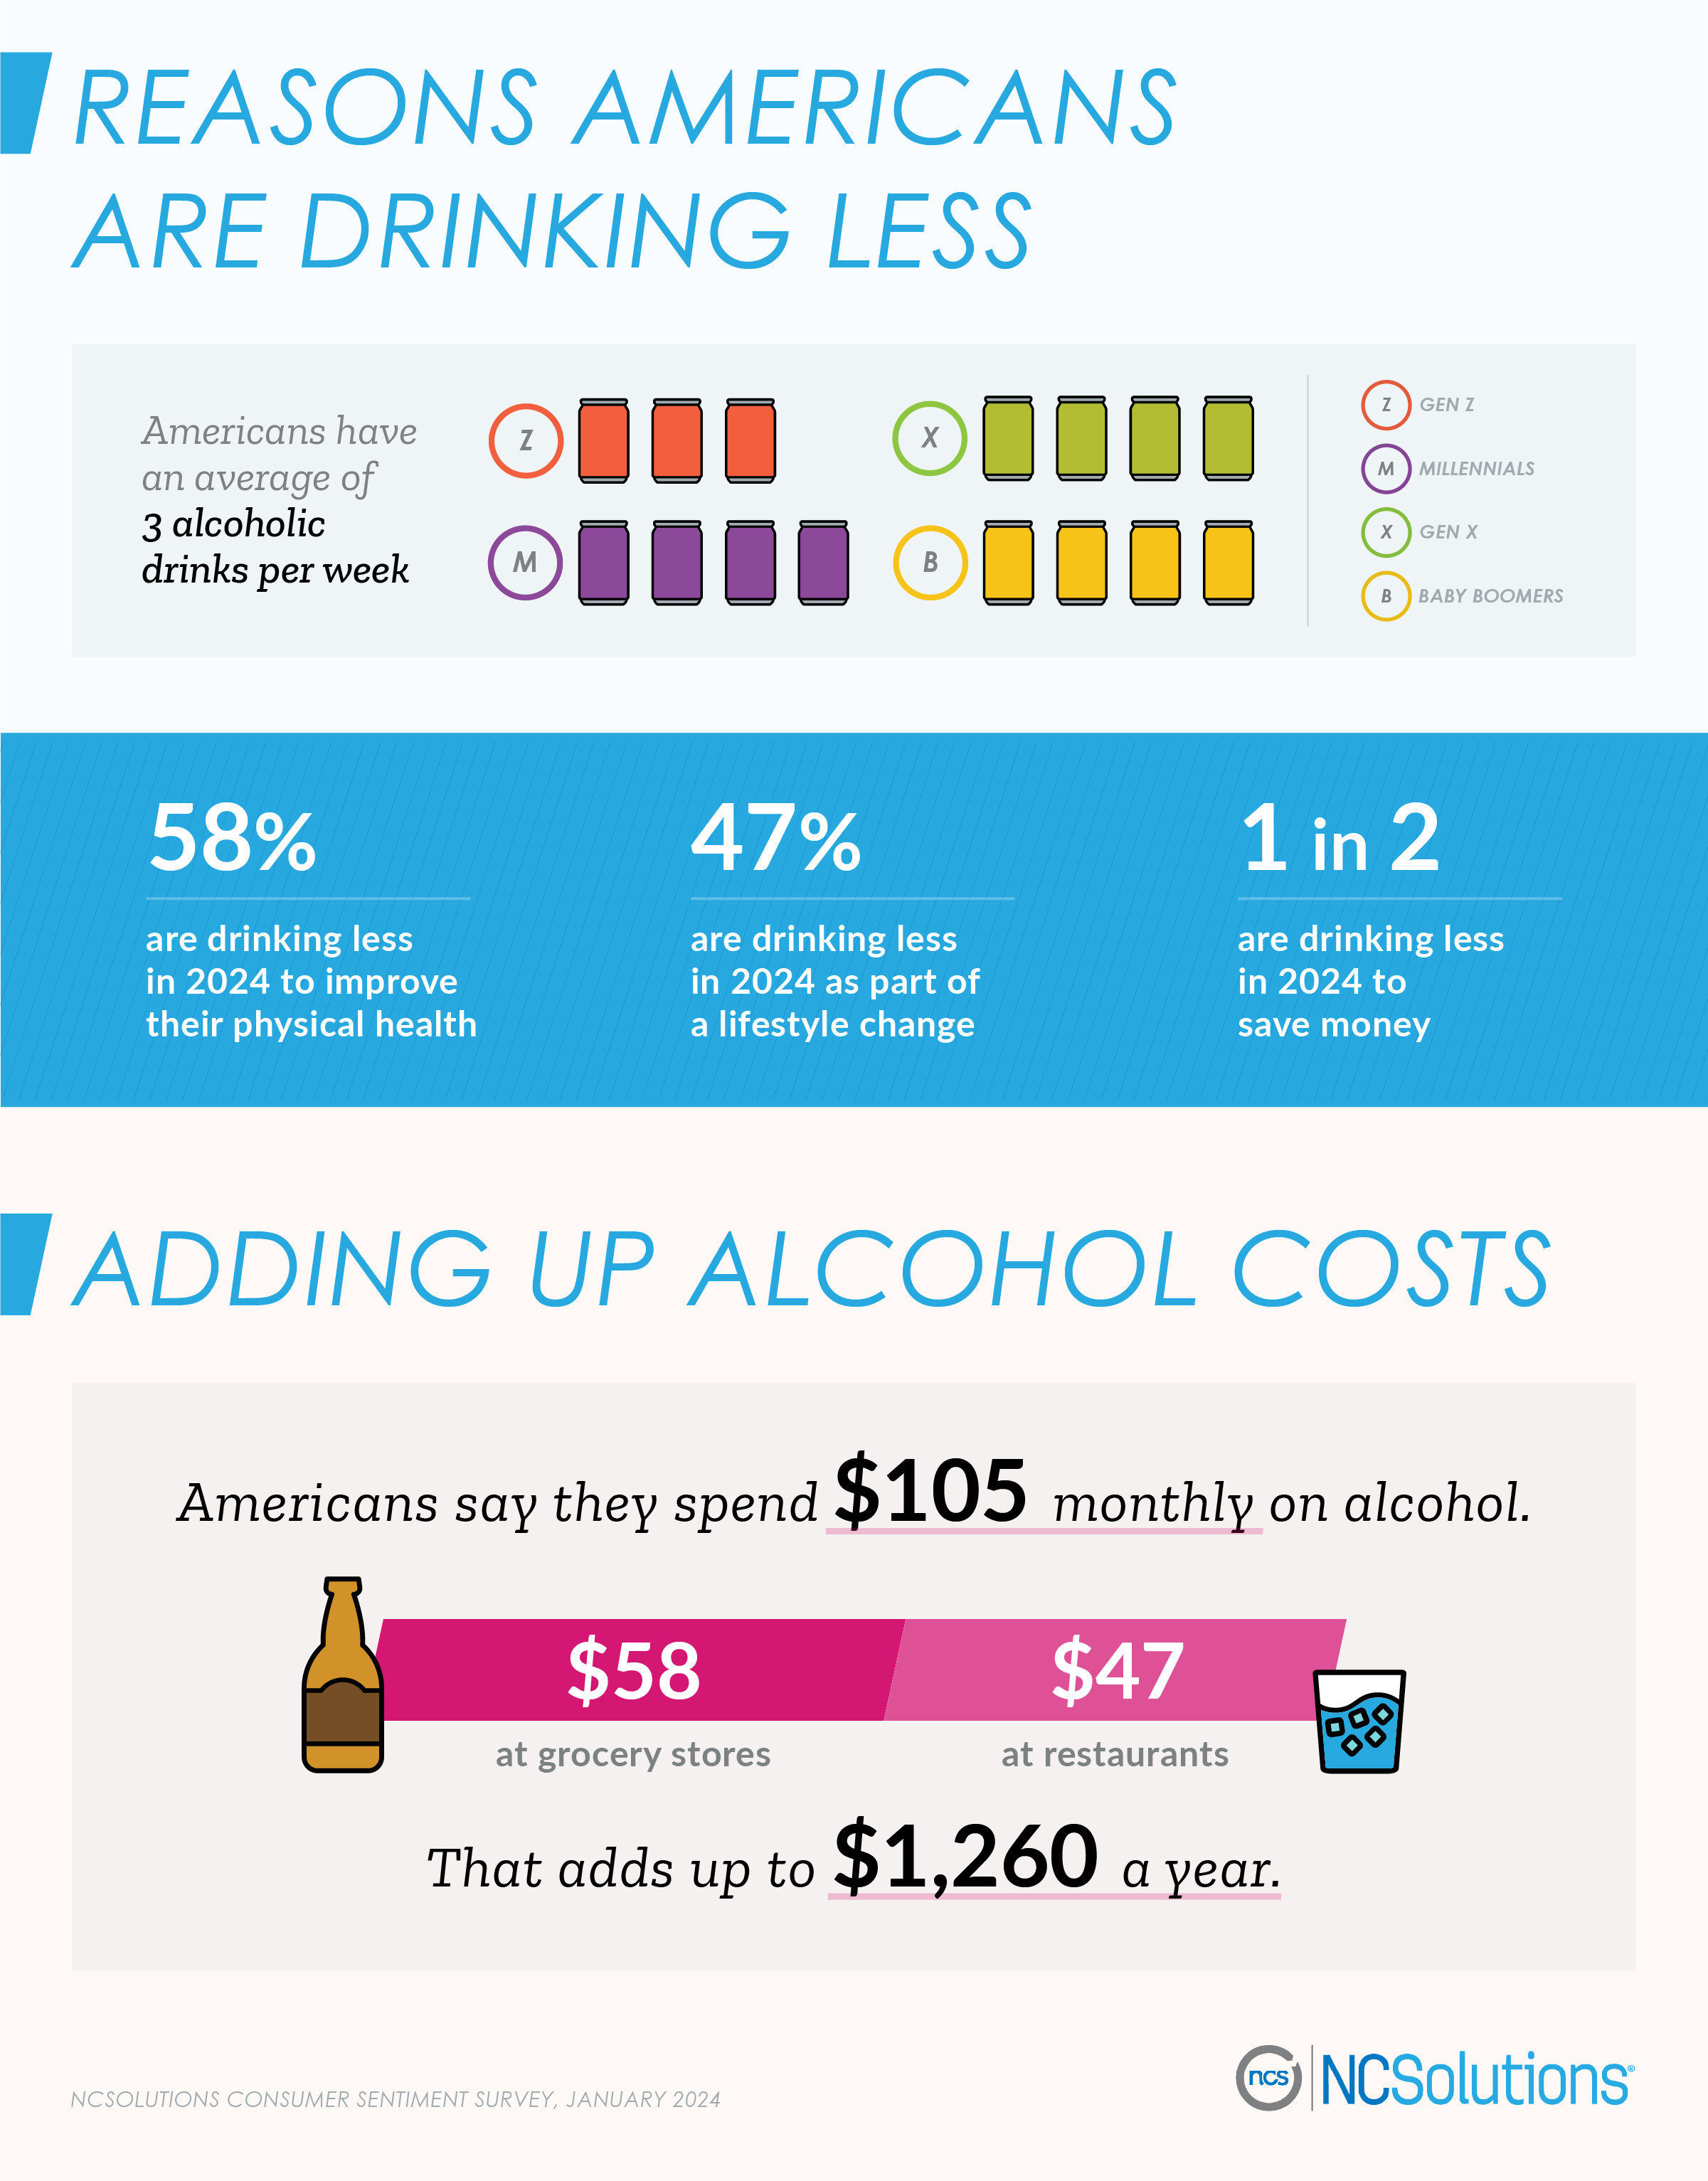 Three reasons Americans are drinking less - report by ncsolutions.com 